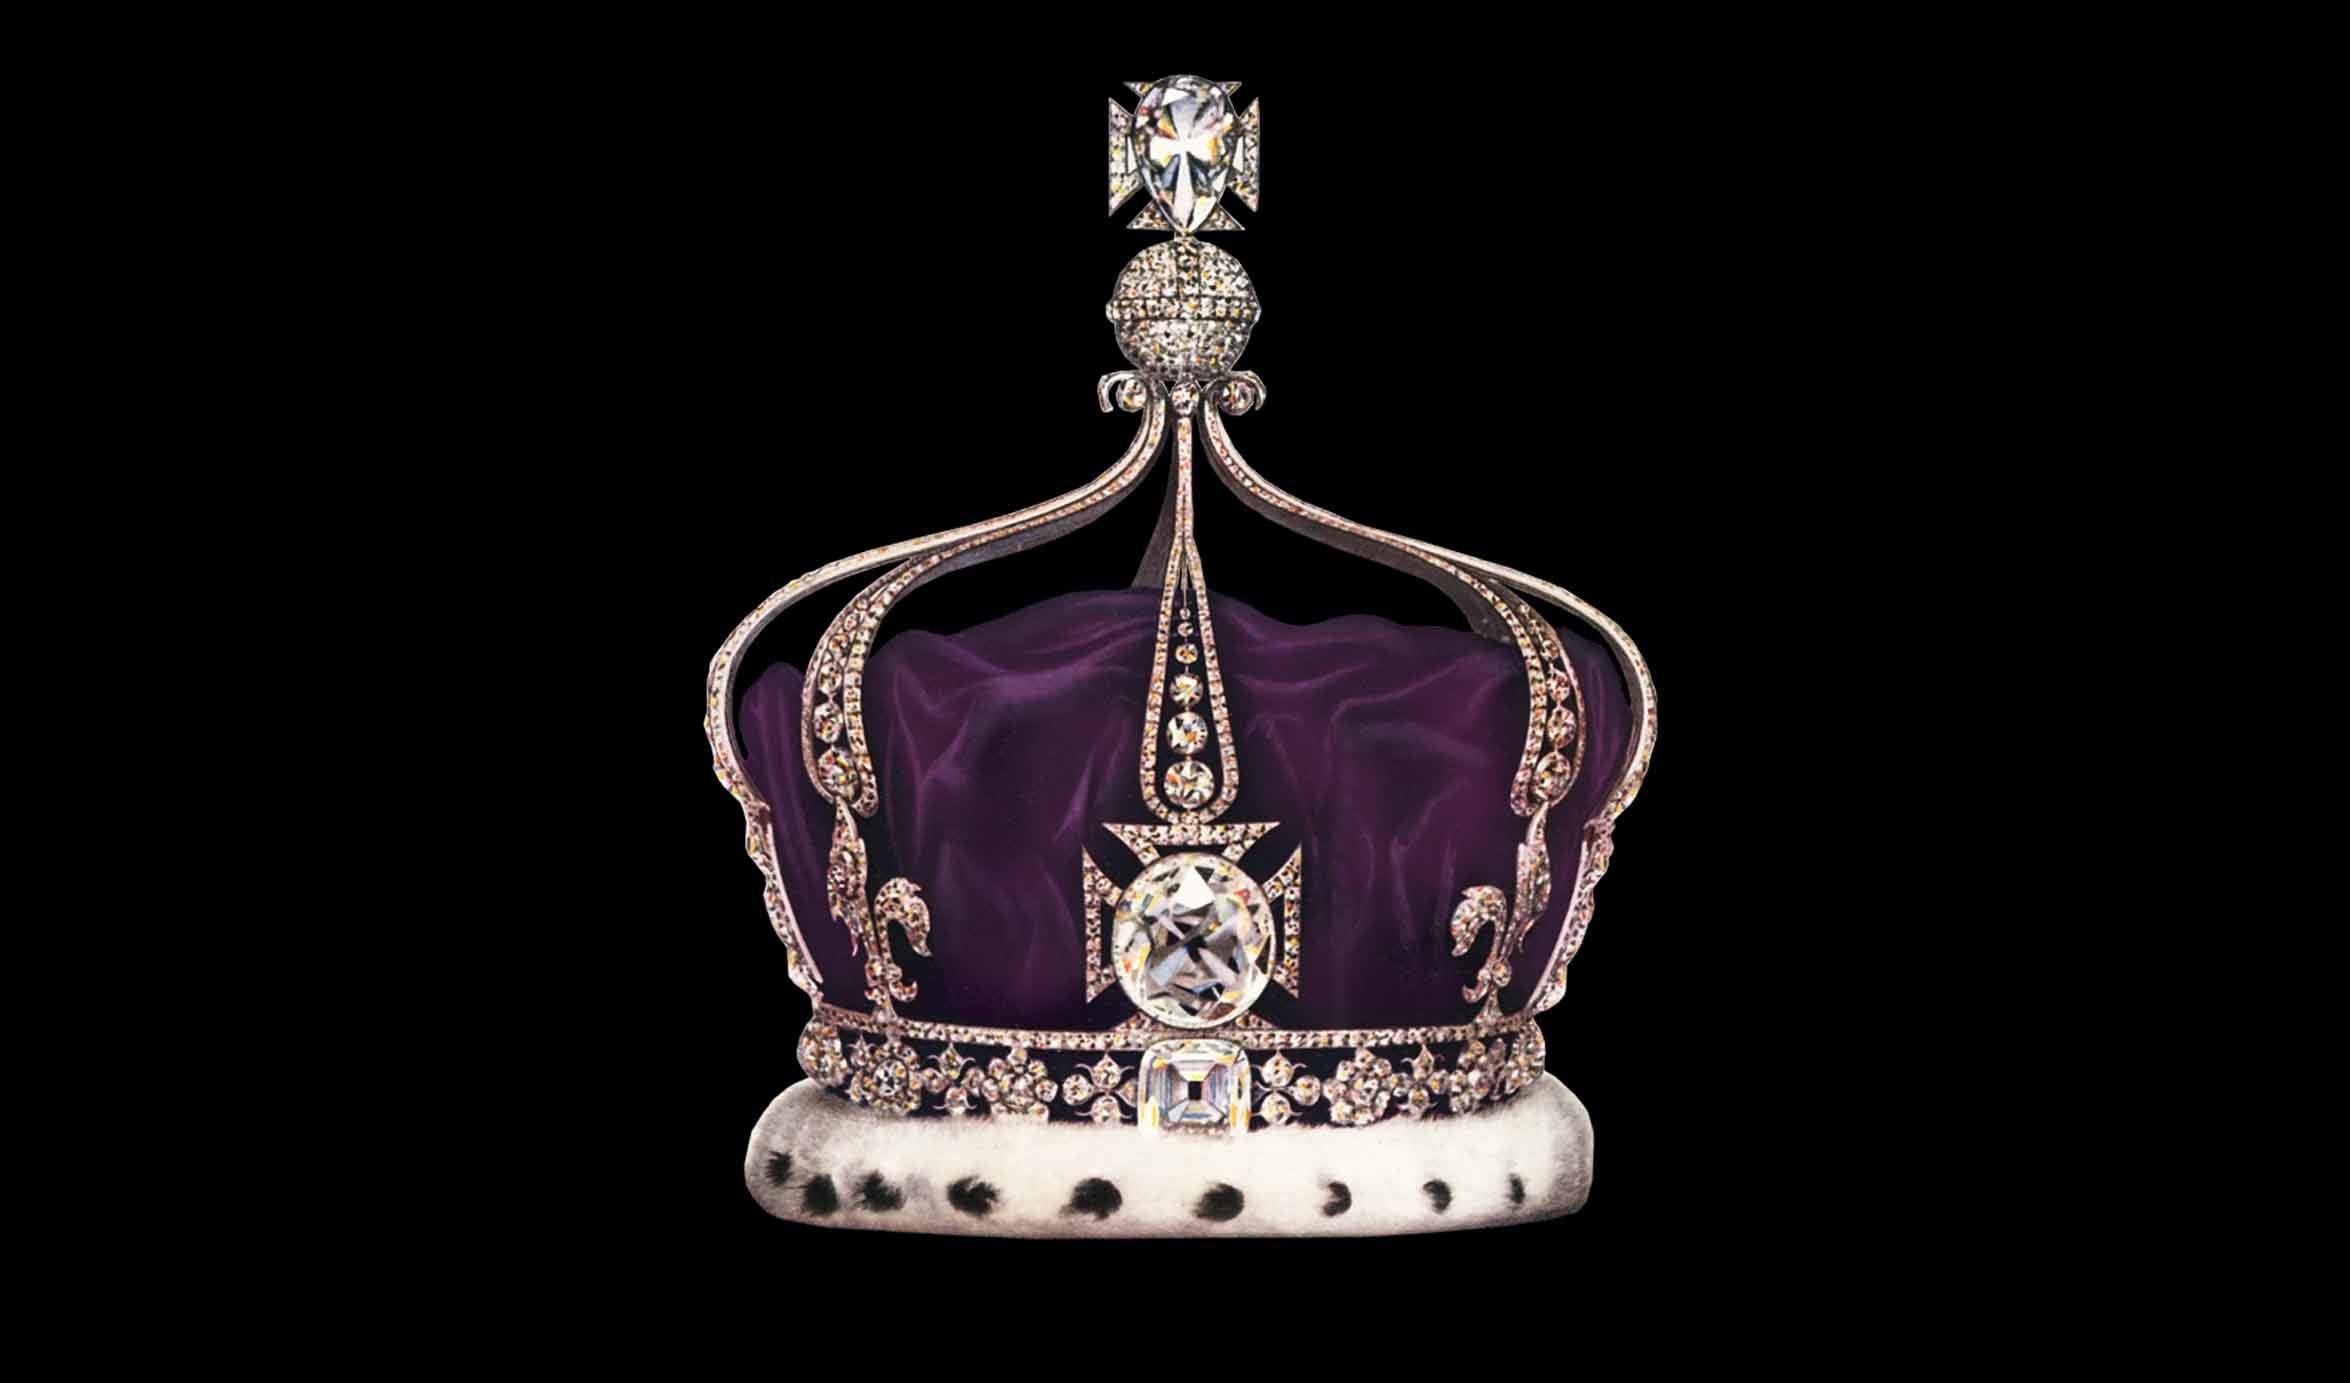 Kohinoor: The Story of the World's Most Infamous Diamond – William